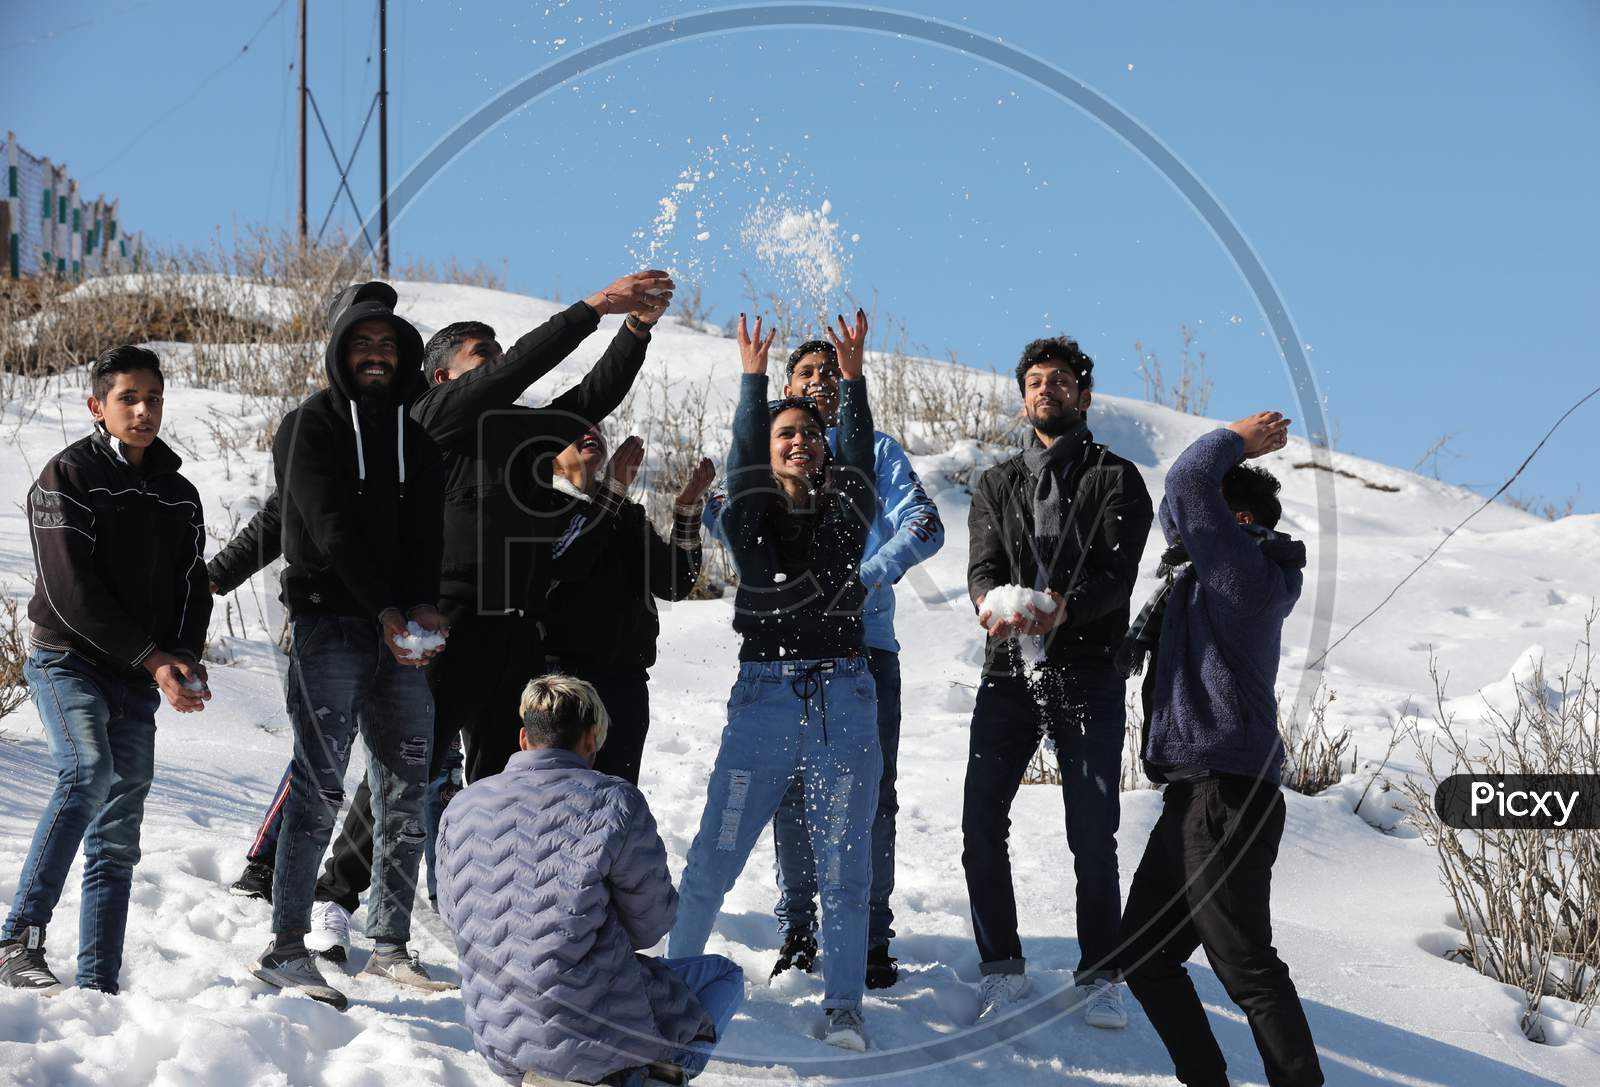 Tourist Play With Snow At Nathatop Near Patnitop About 110Km From Jammu On Sunday10 Jan,2021.